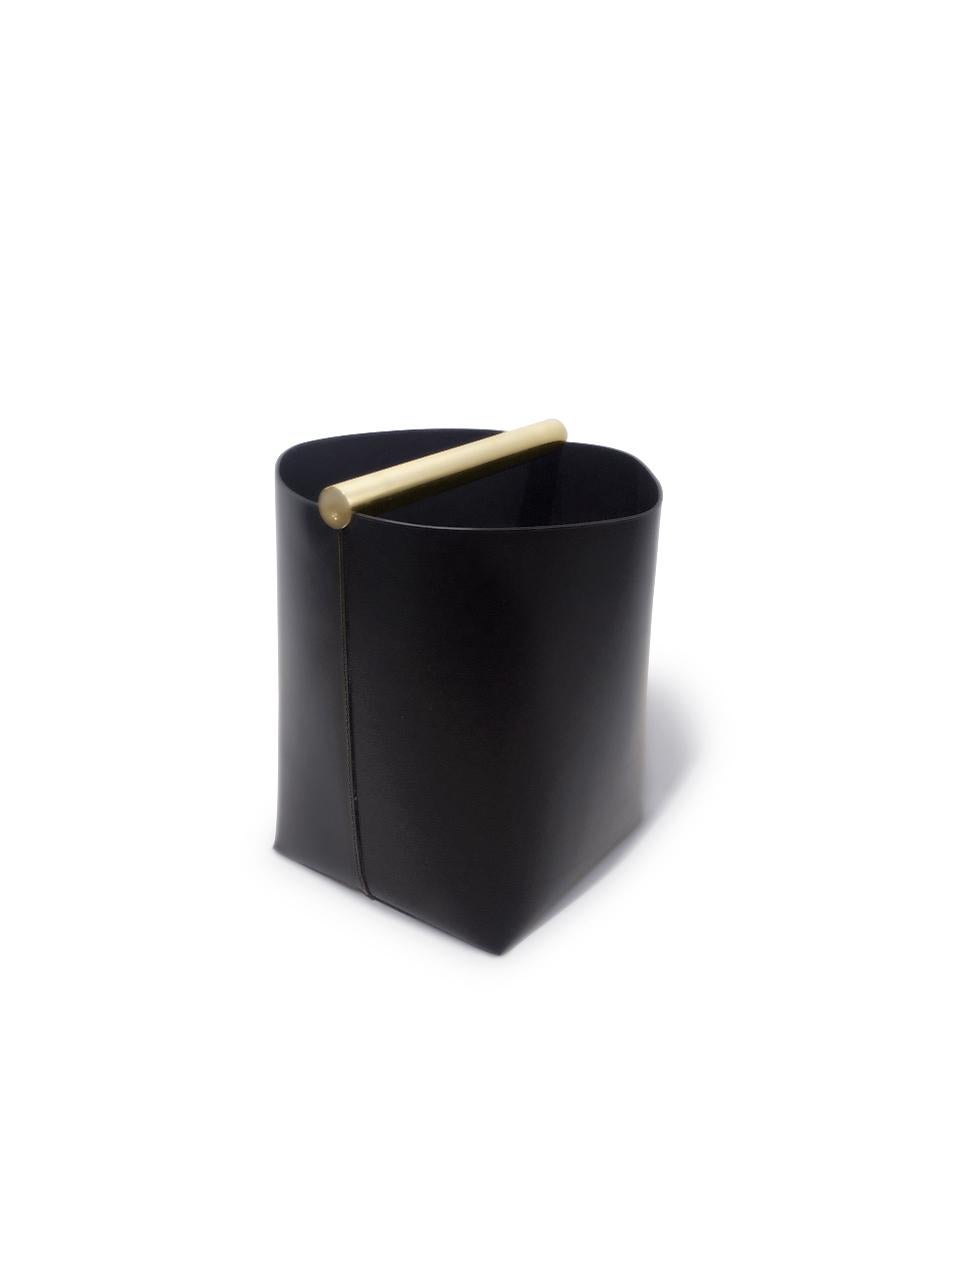 Hand-Crafted Contemporary Italian Leather and Swedish Brass Modern Minimalist Paper Basket For Sale